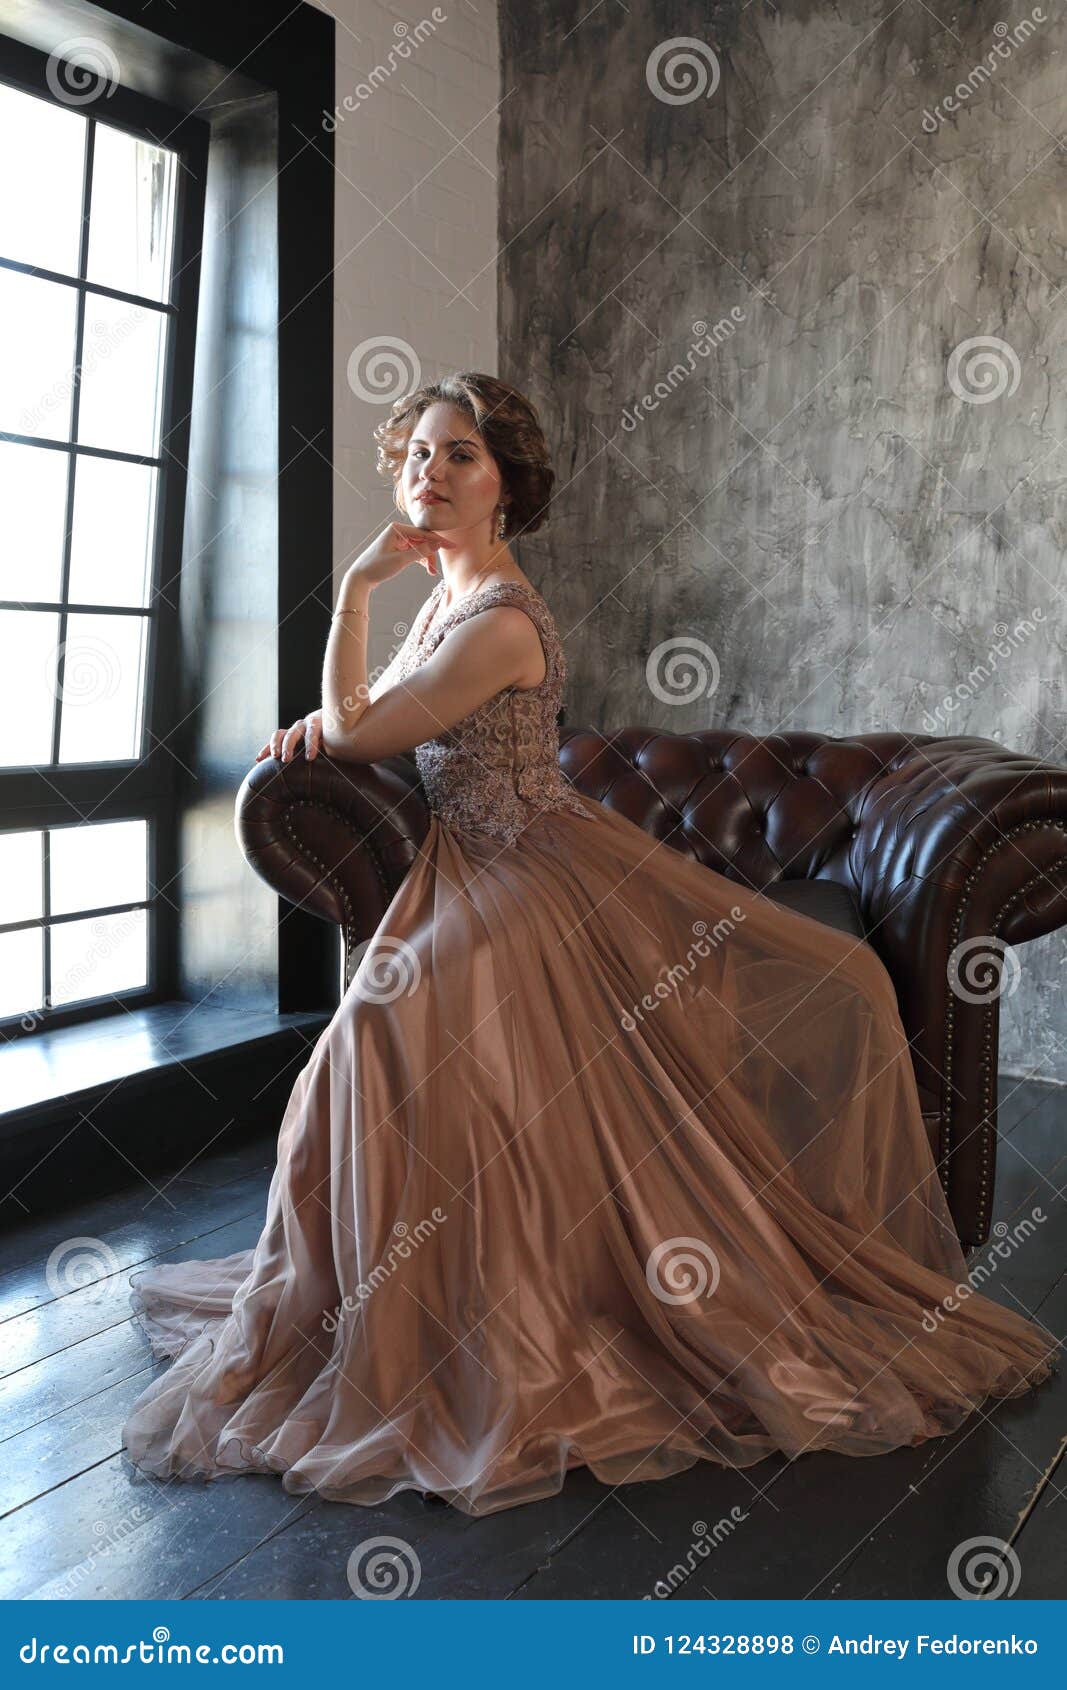 Free Photos - An Elegant Young Girl Dressed In A Pink Ball Gown, Paired  With A Beautiful Rose Crown On Her Head. She Is Striking A Pose And Looking  At The Camera,